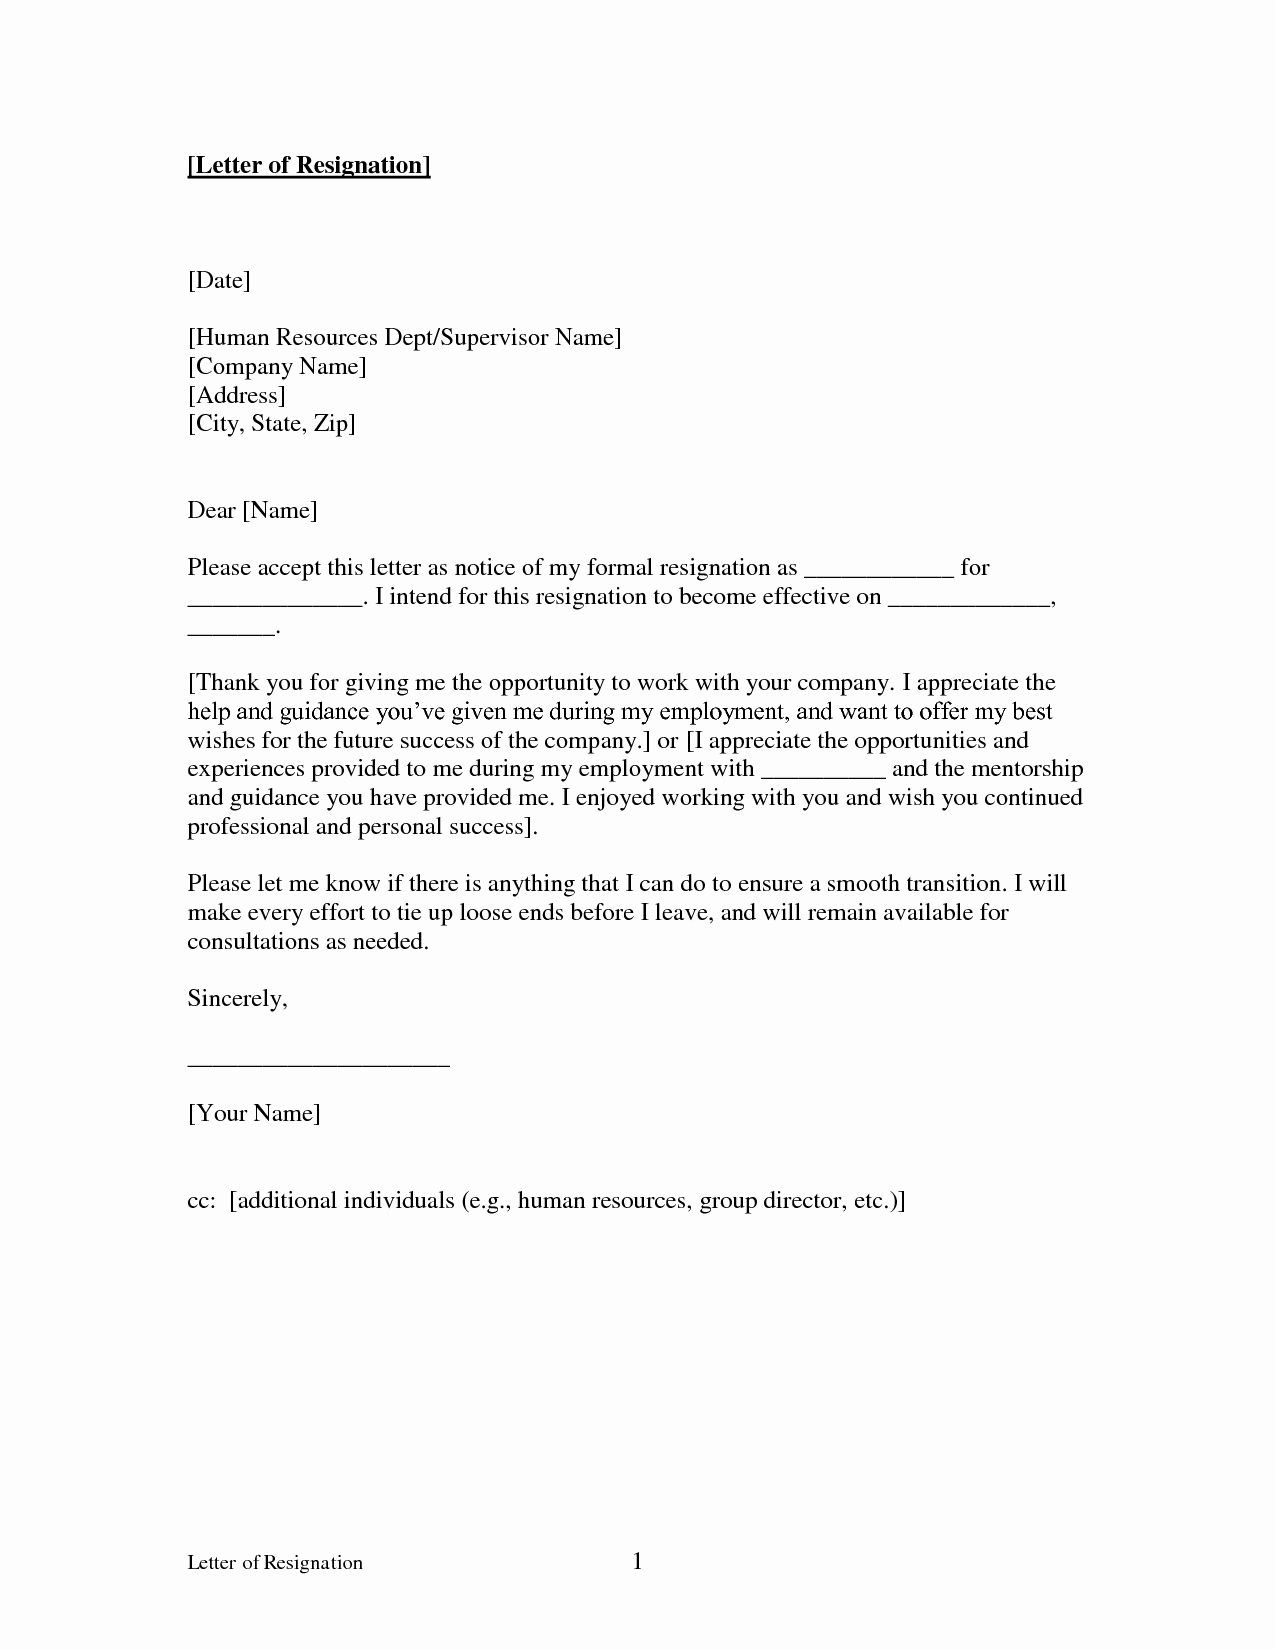 Form Letter Of Resignation Awesome Free Printable Letter Of Resignation form Generic